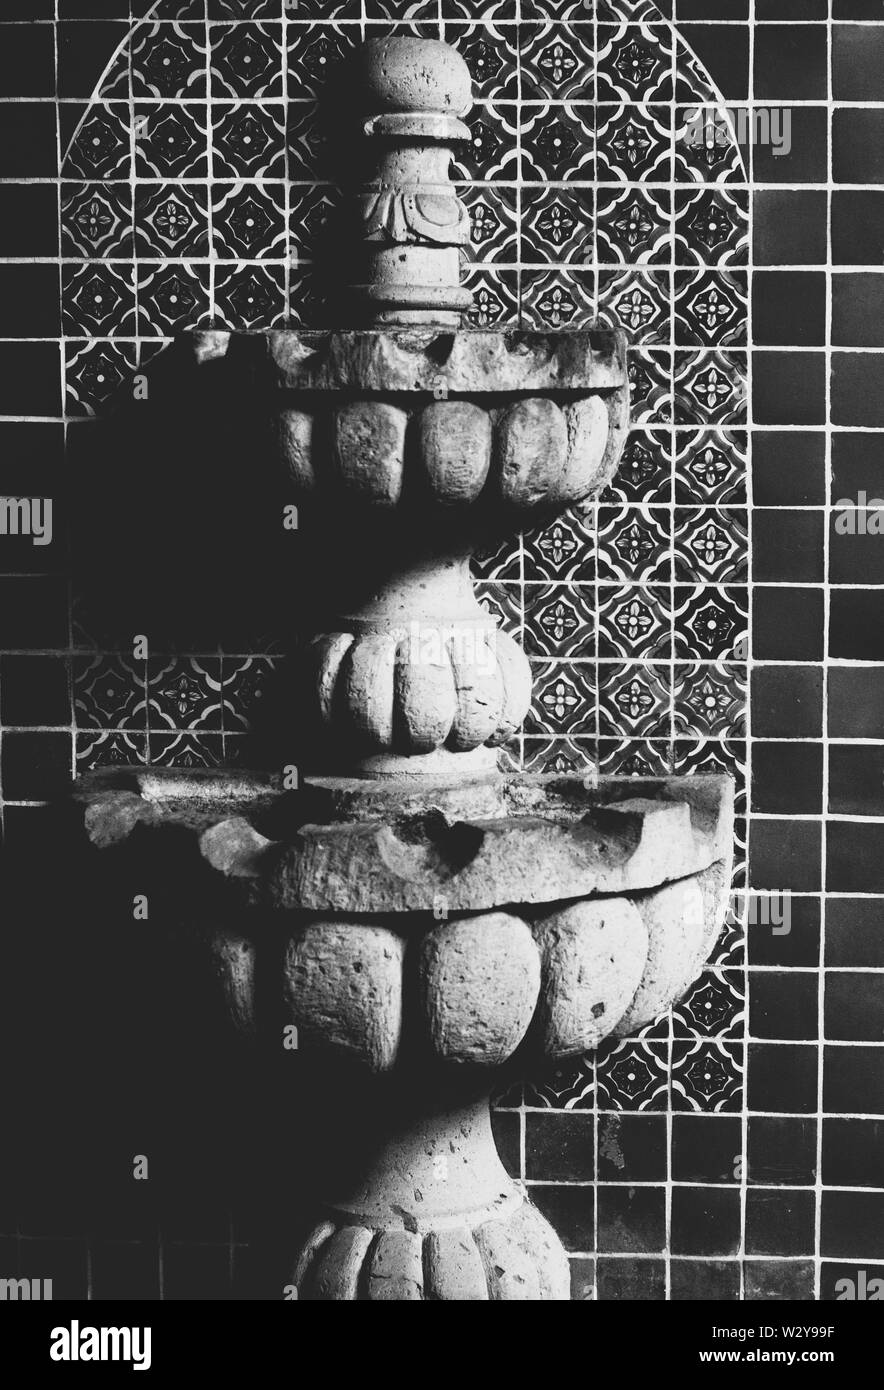 Closeup of a decorative indoors fountain on mosaic tiles shot in black and white Stock Photo